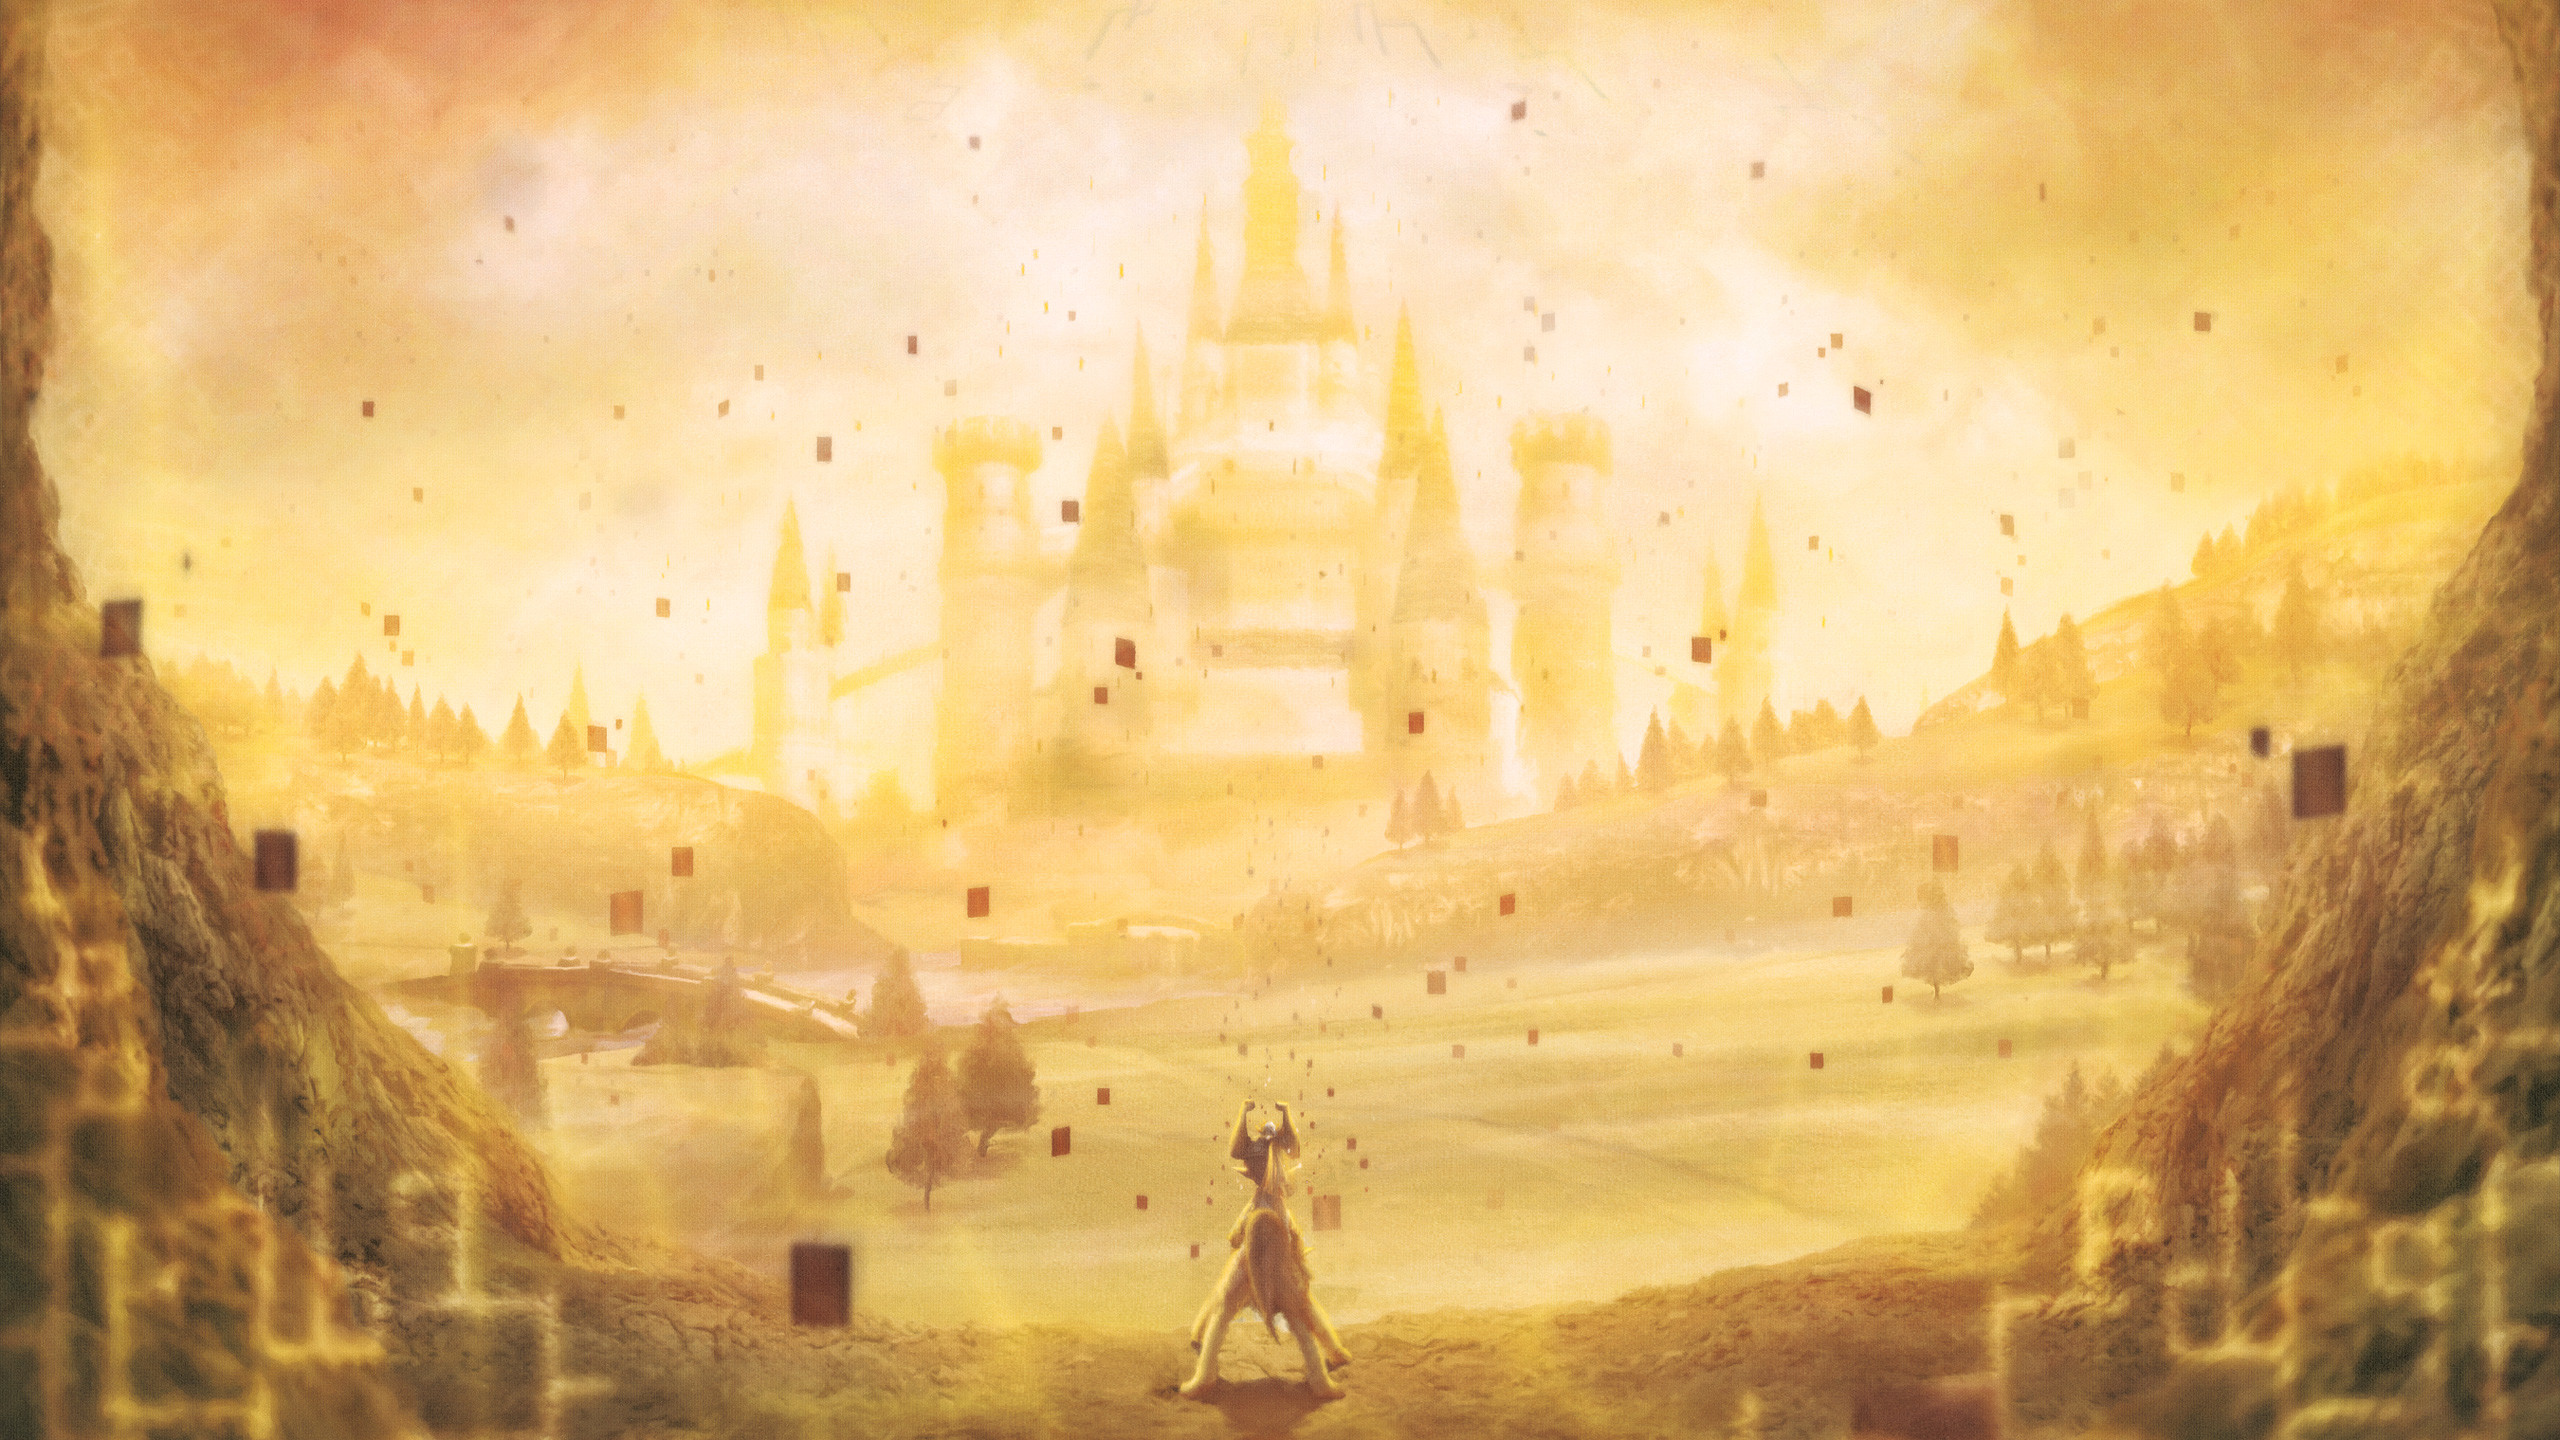 2560x1440 Wallpapers. Golden Hyrule by Orioto